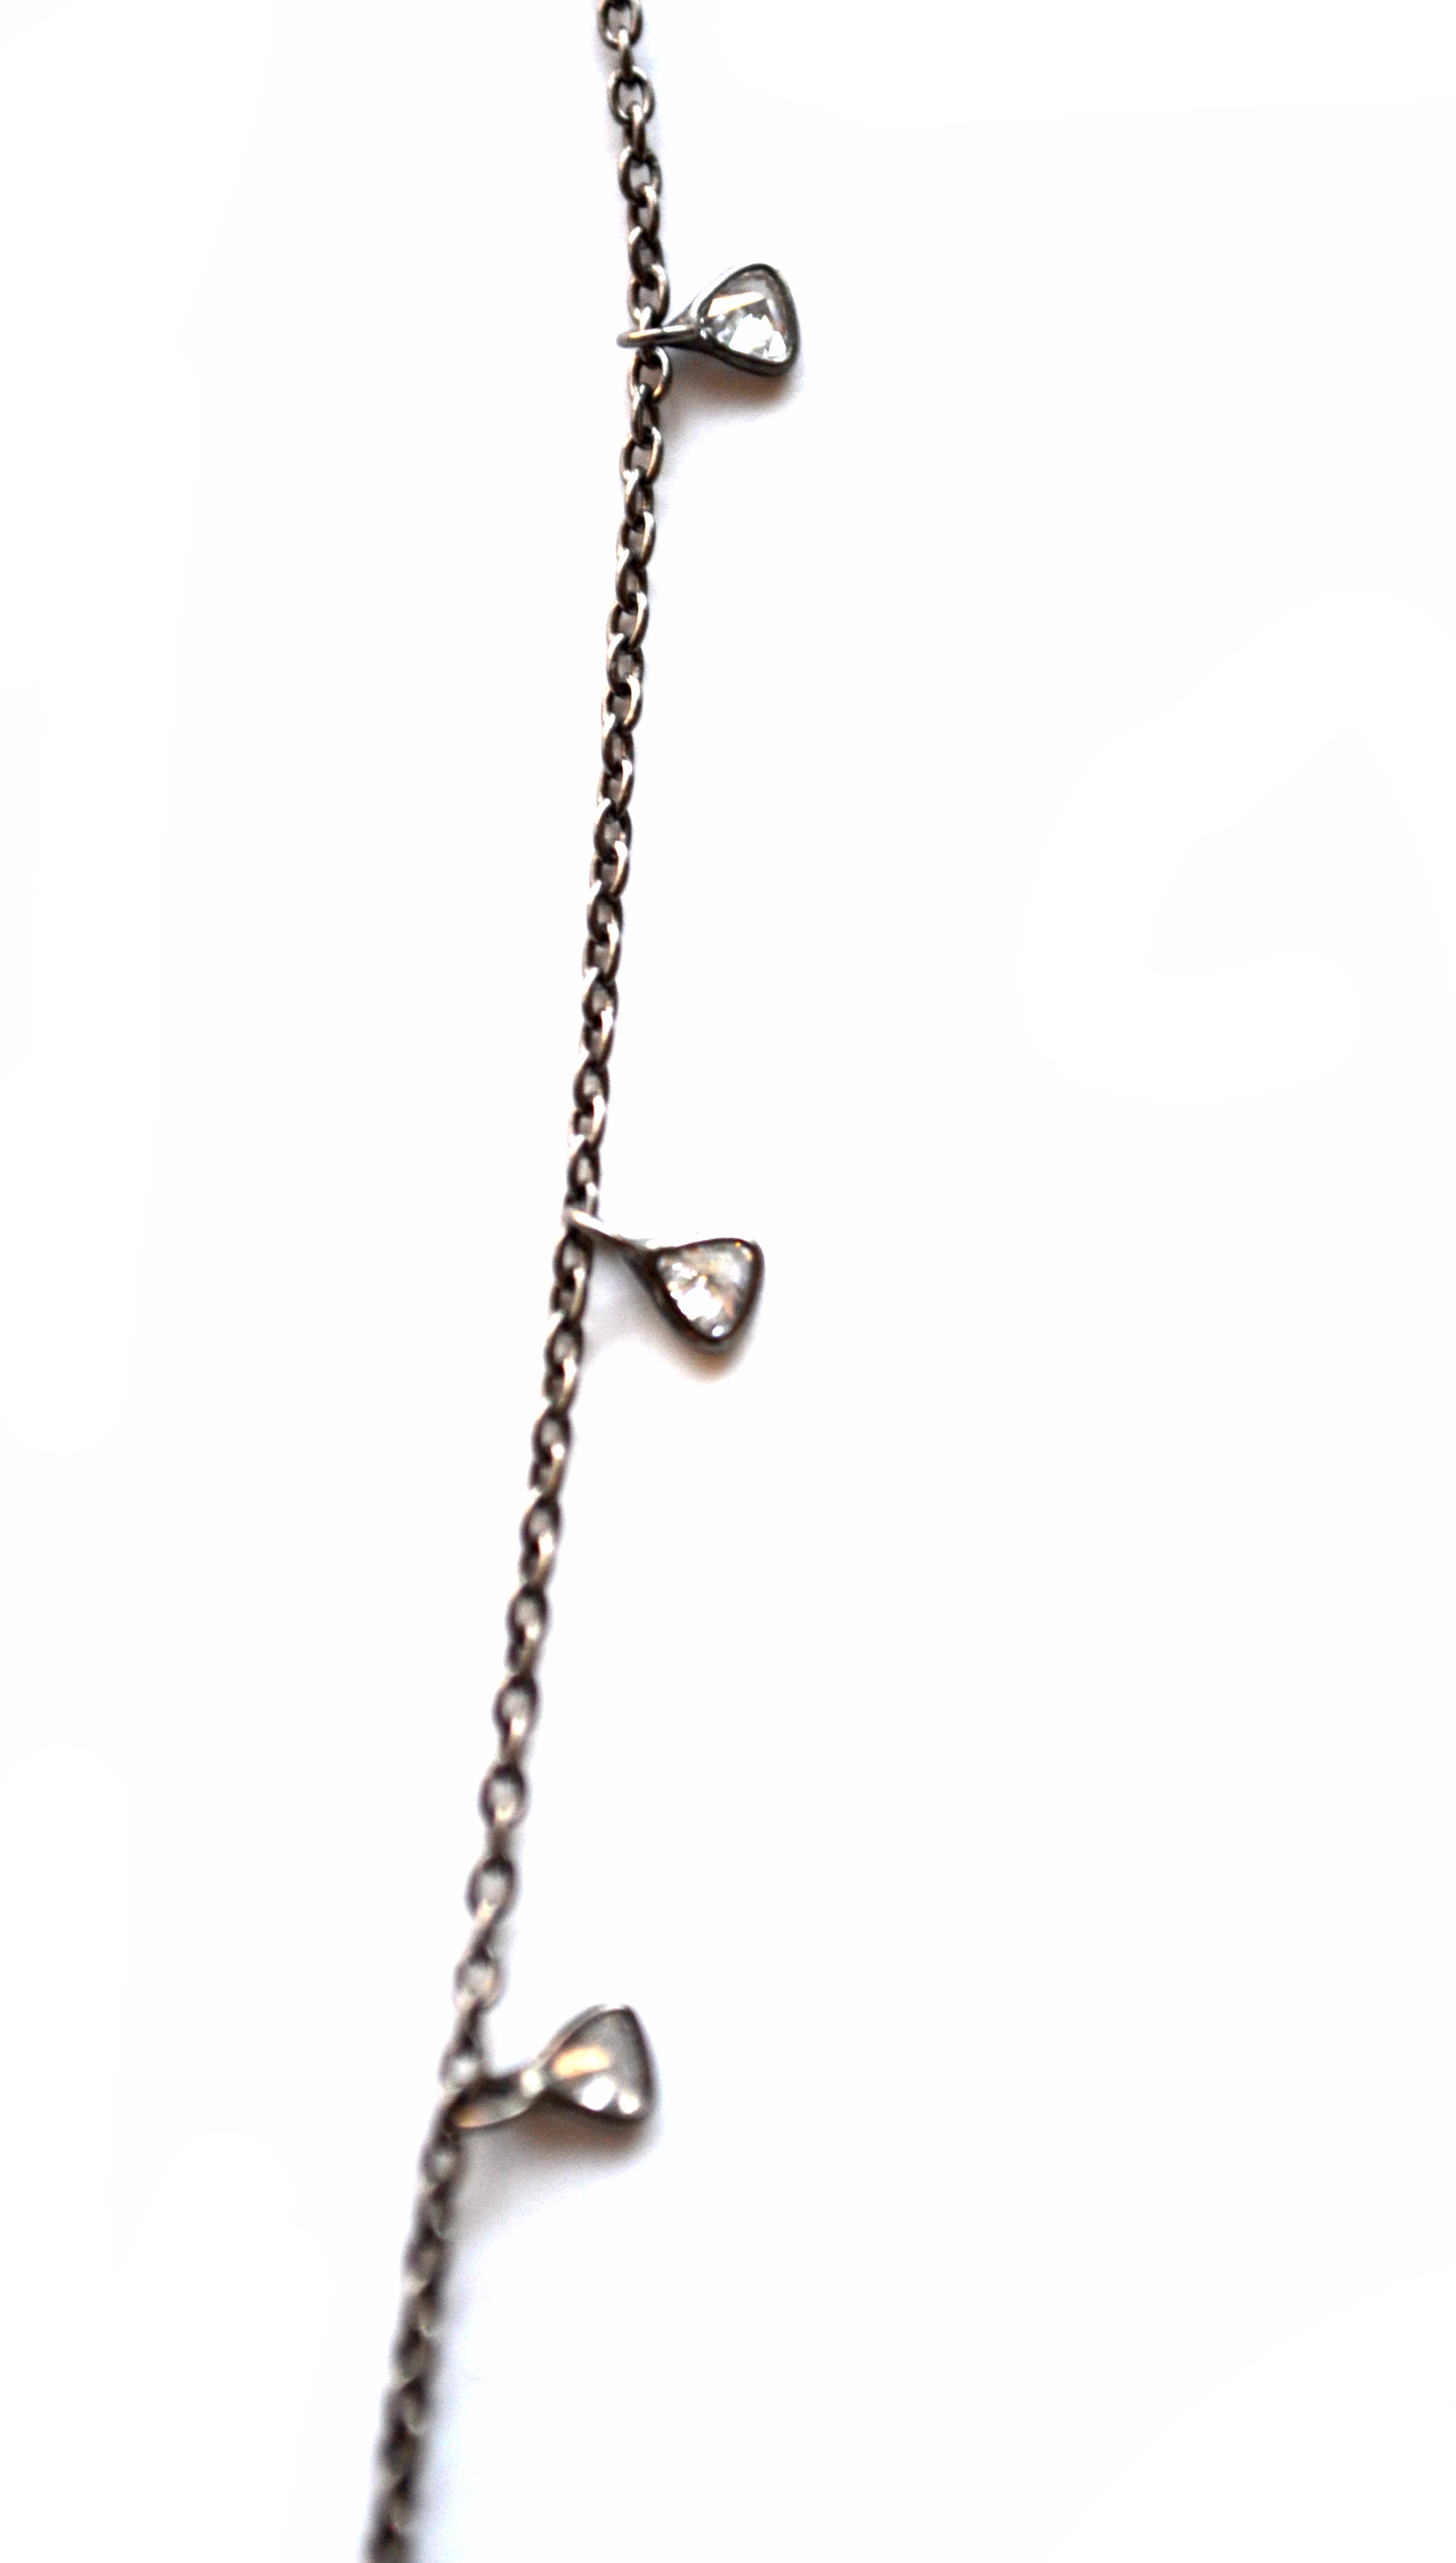 Oxidized Sterling Silver Celestial Diamond Necklace with a Star Charm